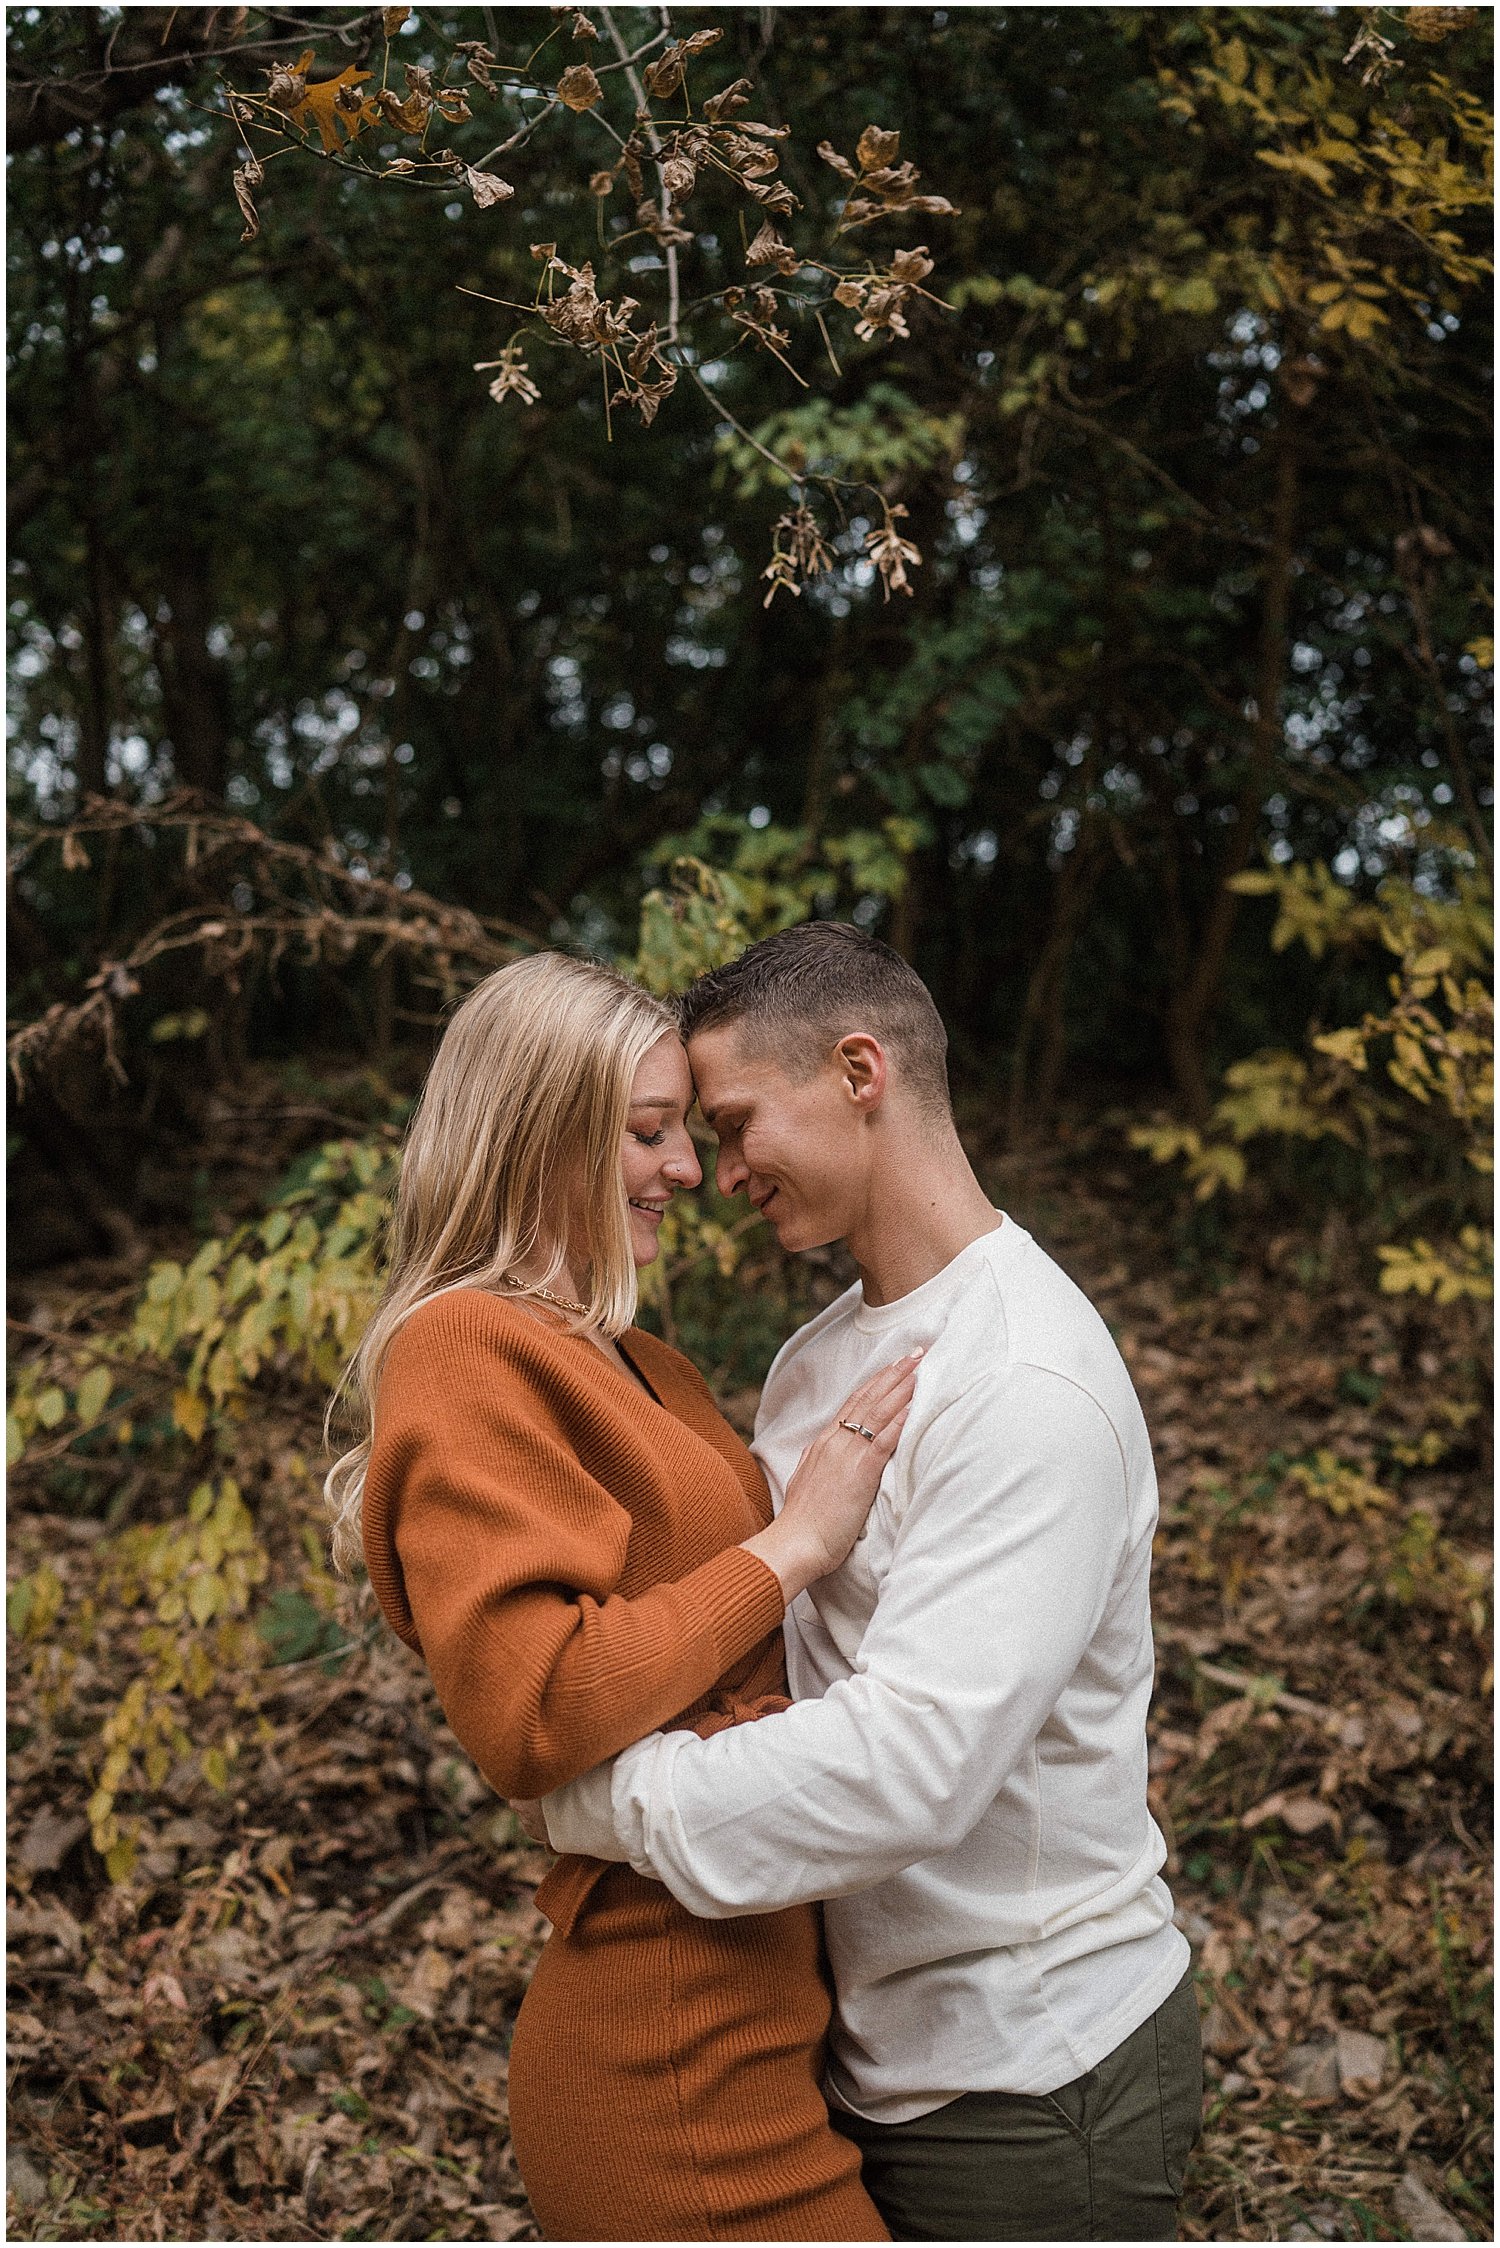 dayton portrait photographers_chelsea hall photography_kayla & eric_miamisburg proposal and pregnancy announcement session_0058.jpg